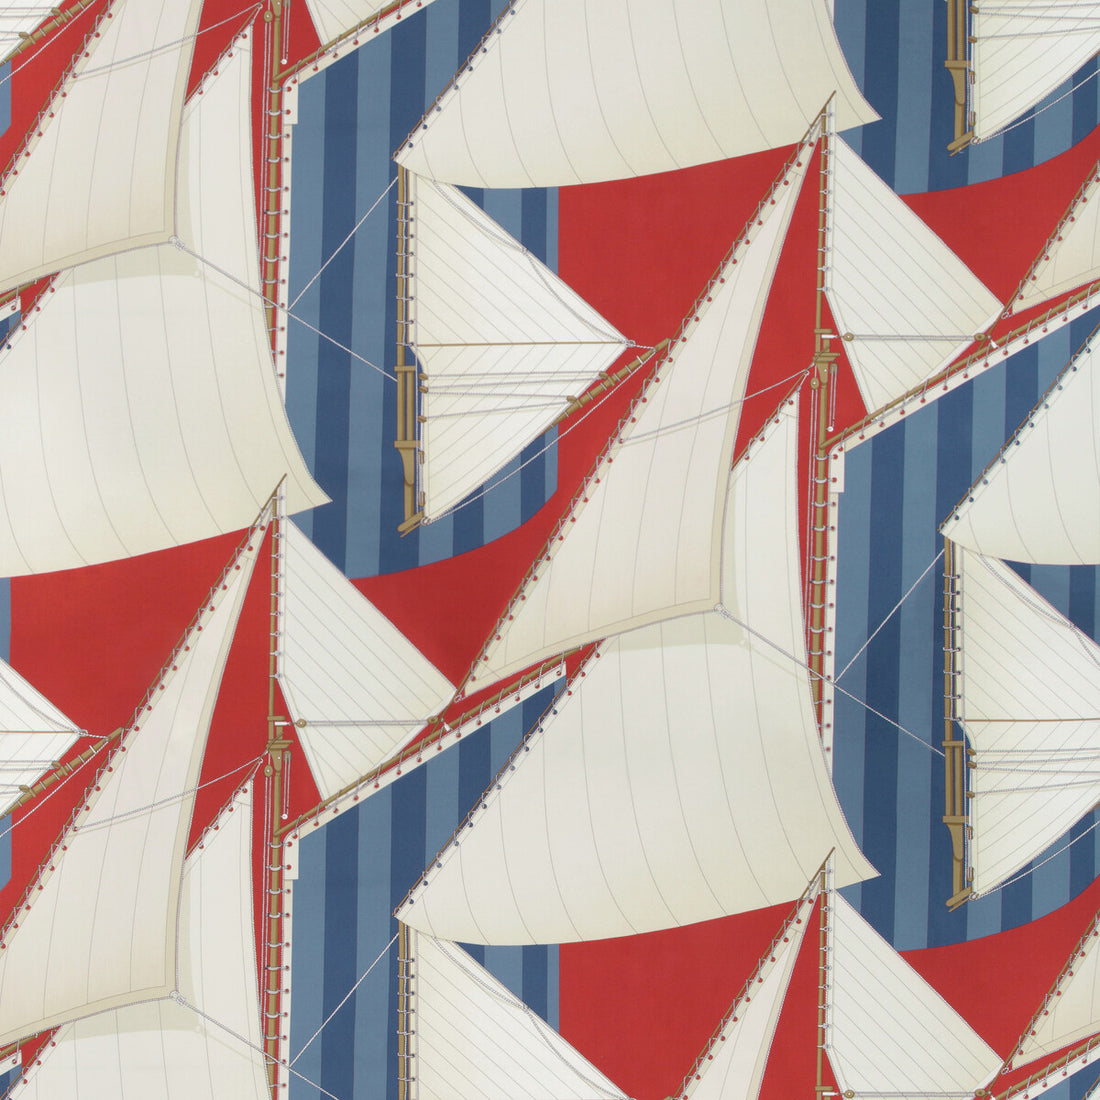 St Tropez Print fabric in red/blue color - pattern 2018136.195.0 - by Lee Jofa in the Suzanne Kasler The Riviera collection